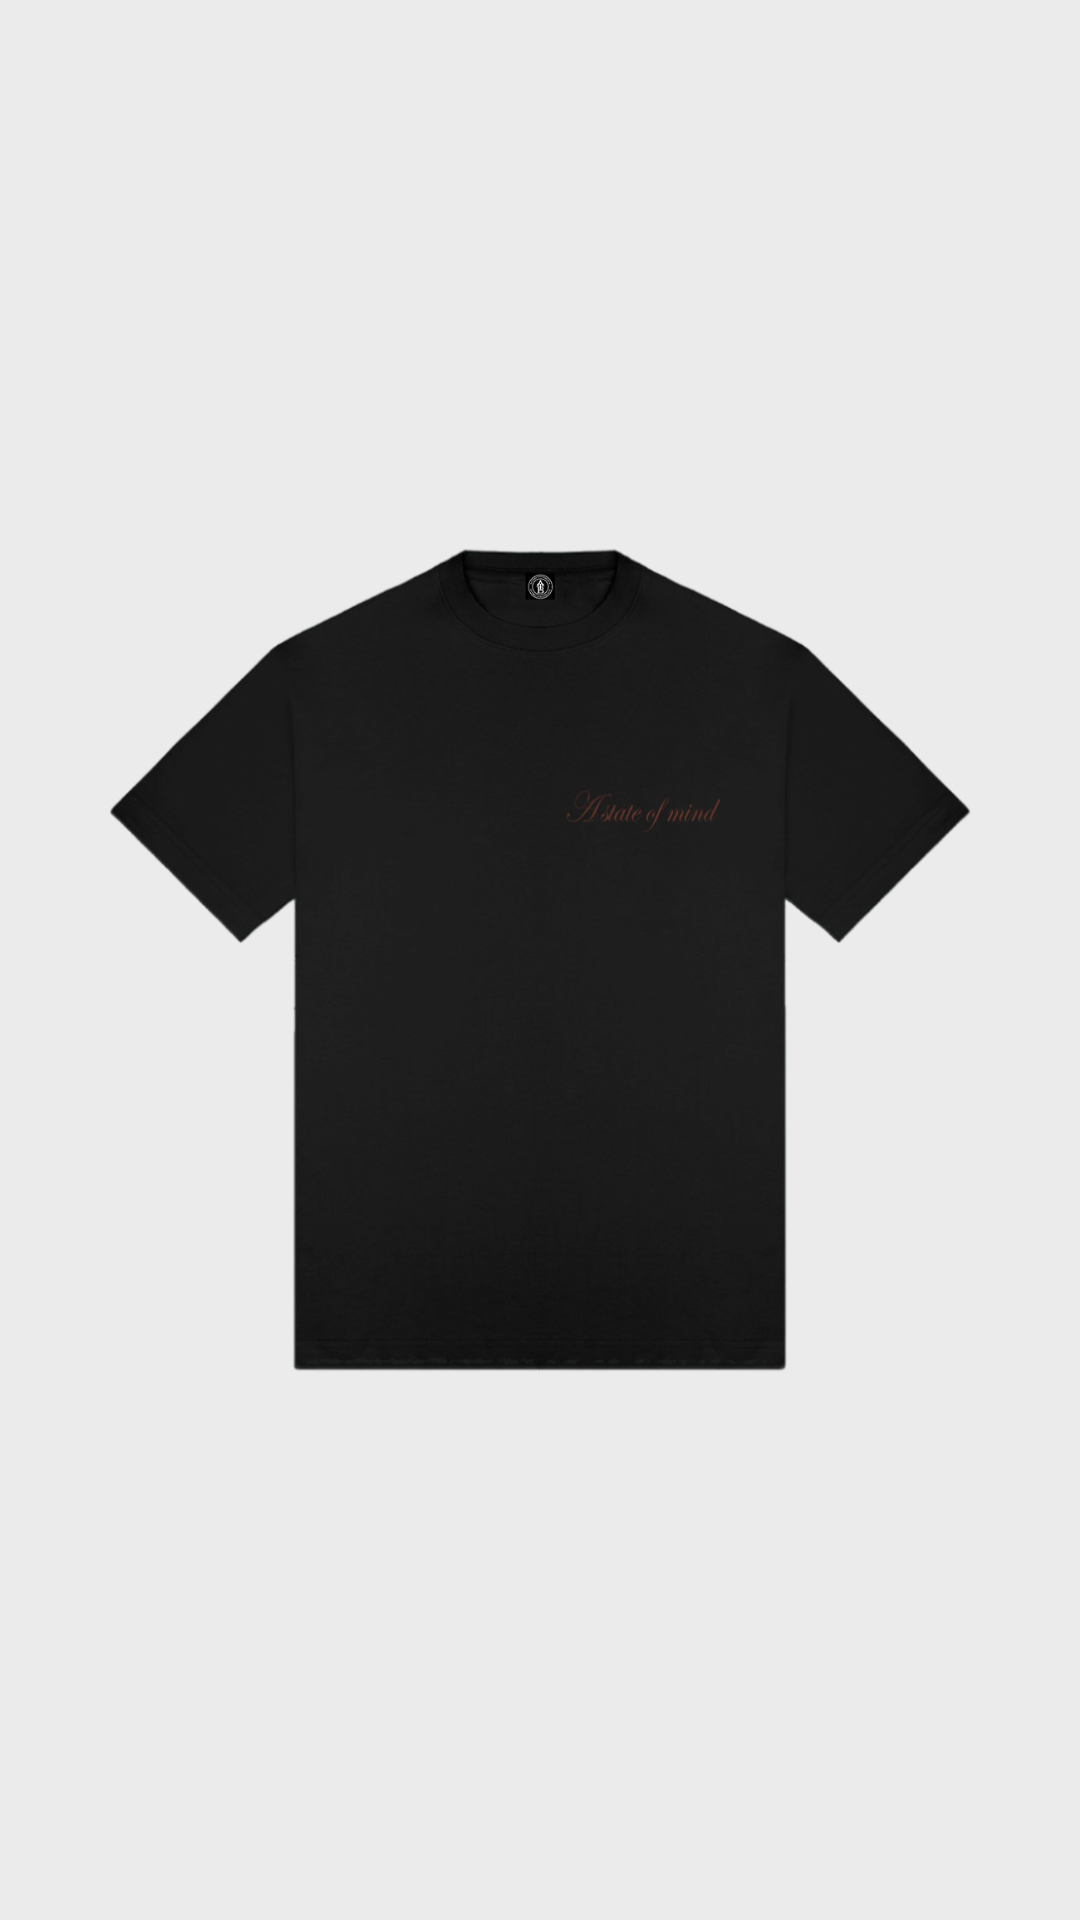 The Mindful Wings Tee